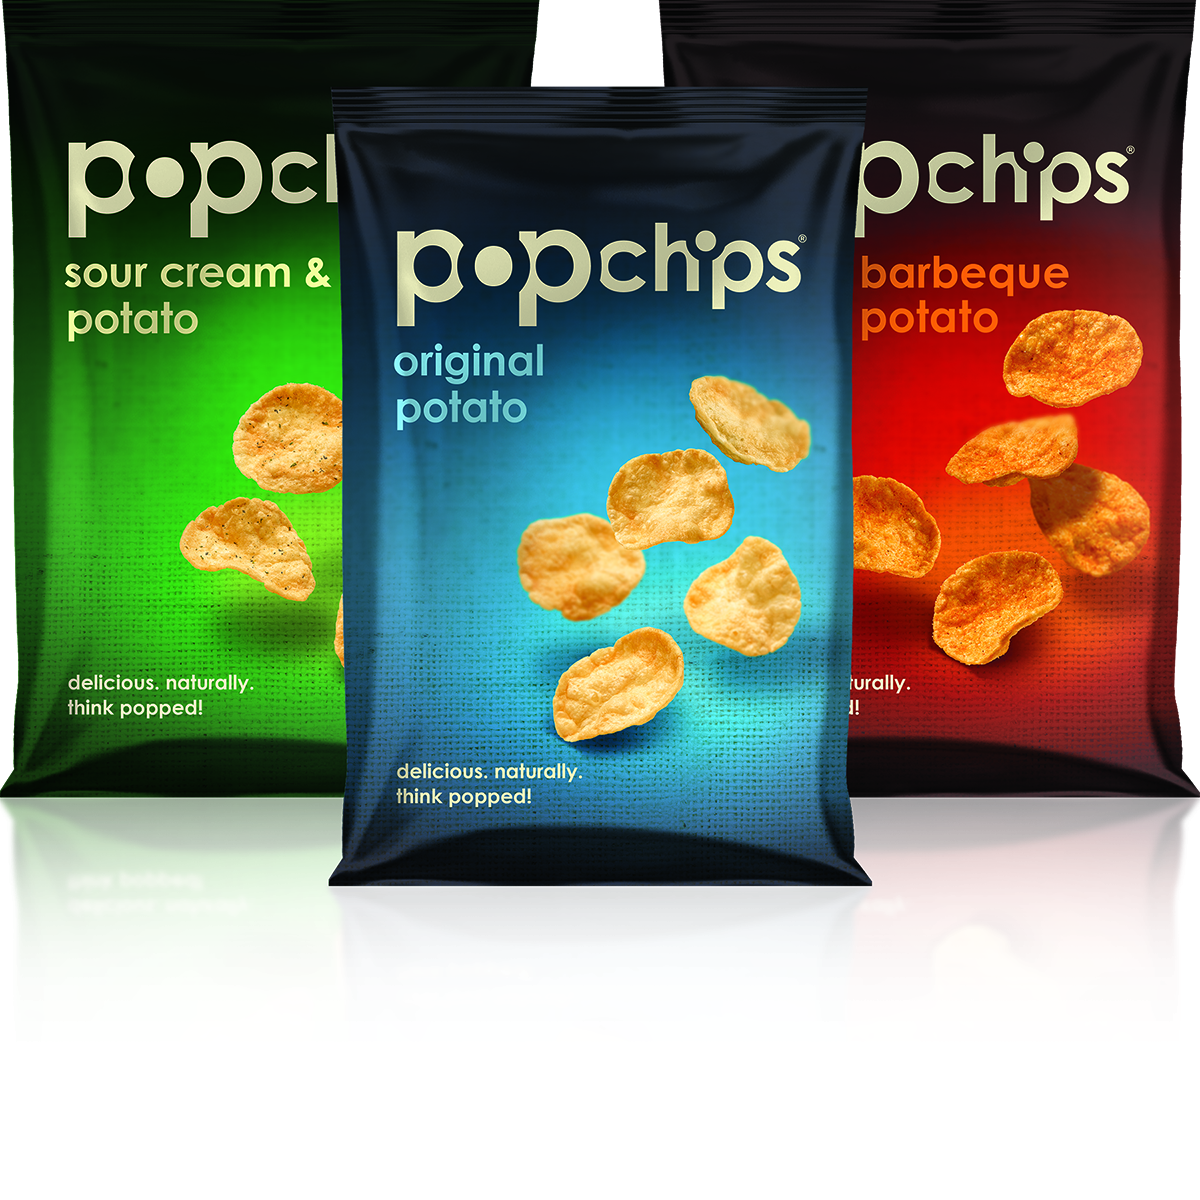 Popchips Review & Giveaway!